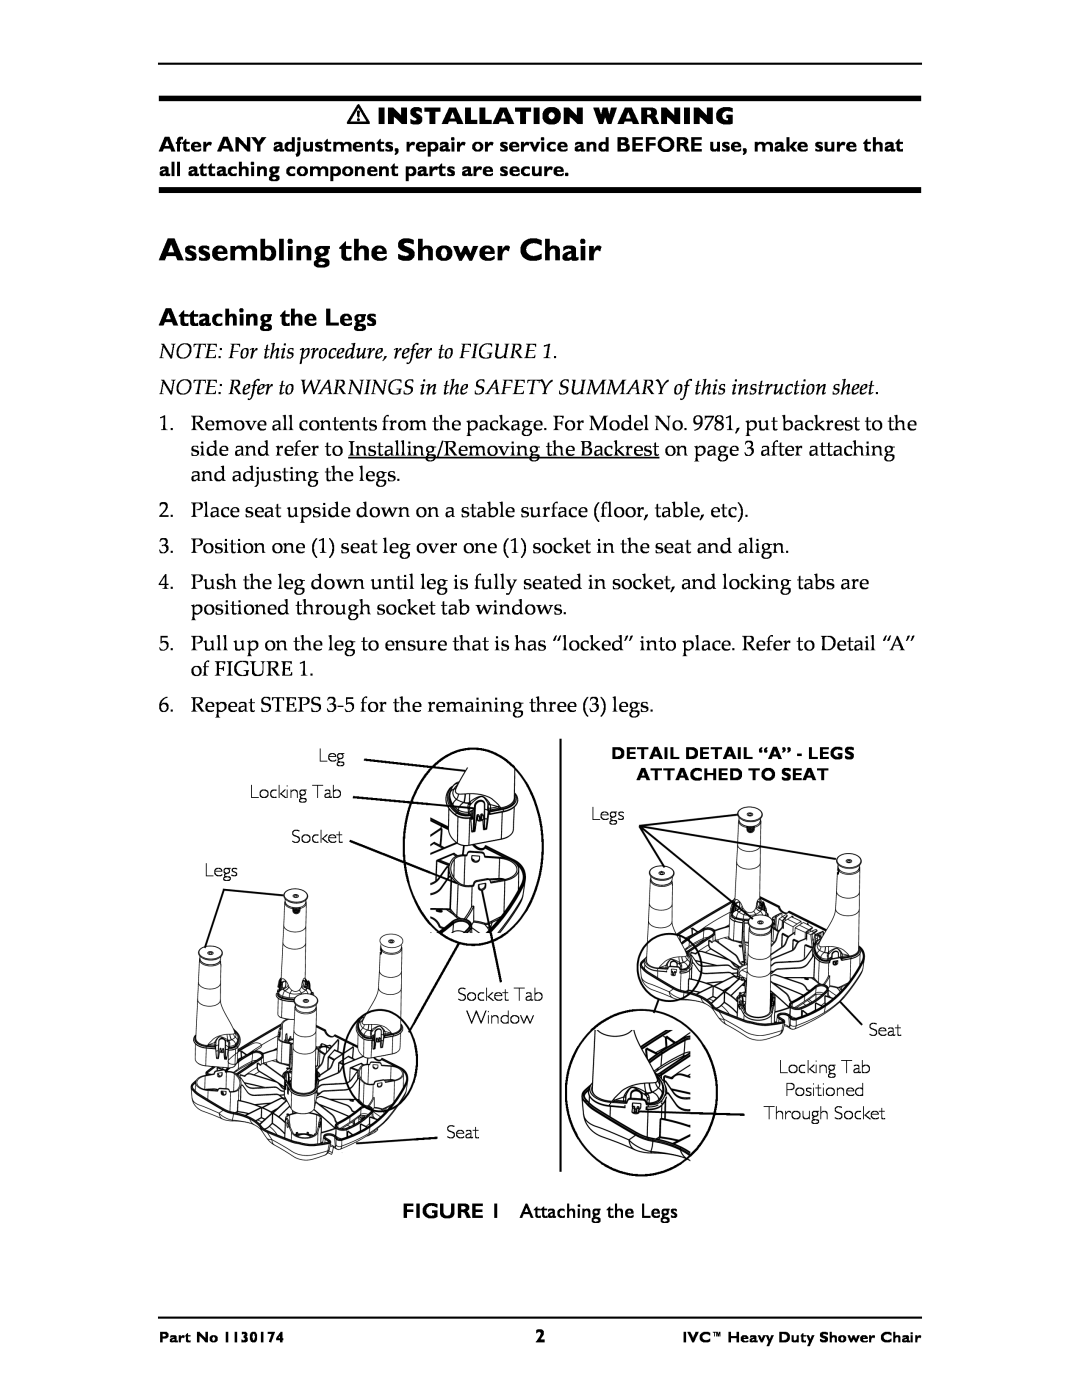 Invacare 9780E, 9781E instruction sheet Assembling the Shower Chair, Installation Warning, Attaching the Legs 